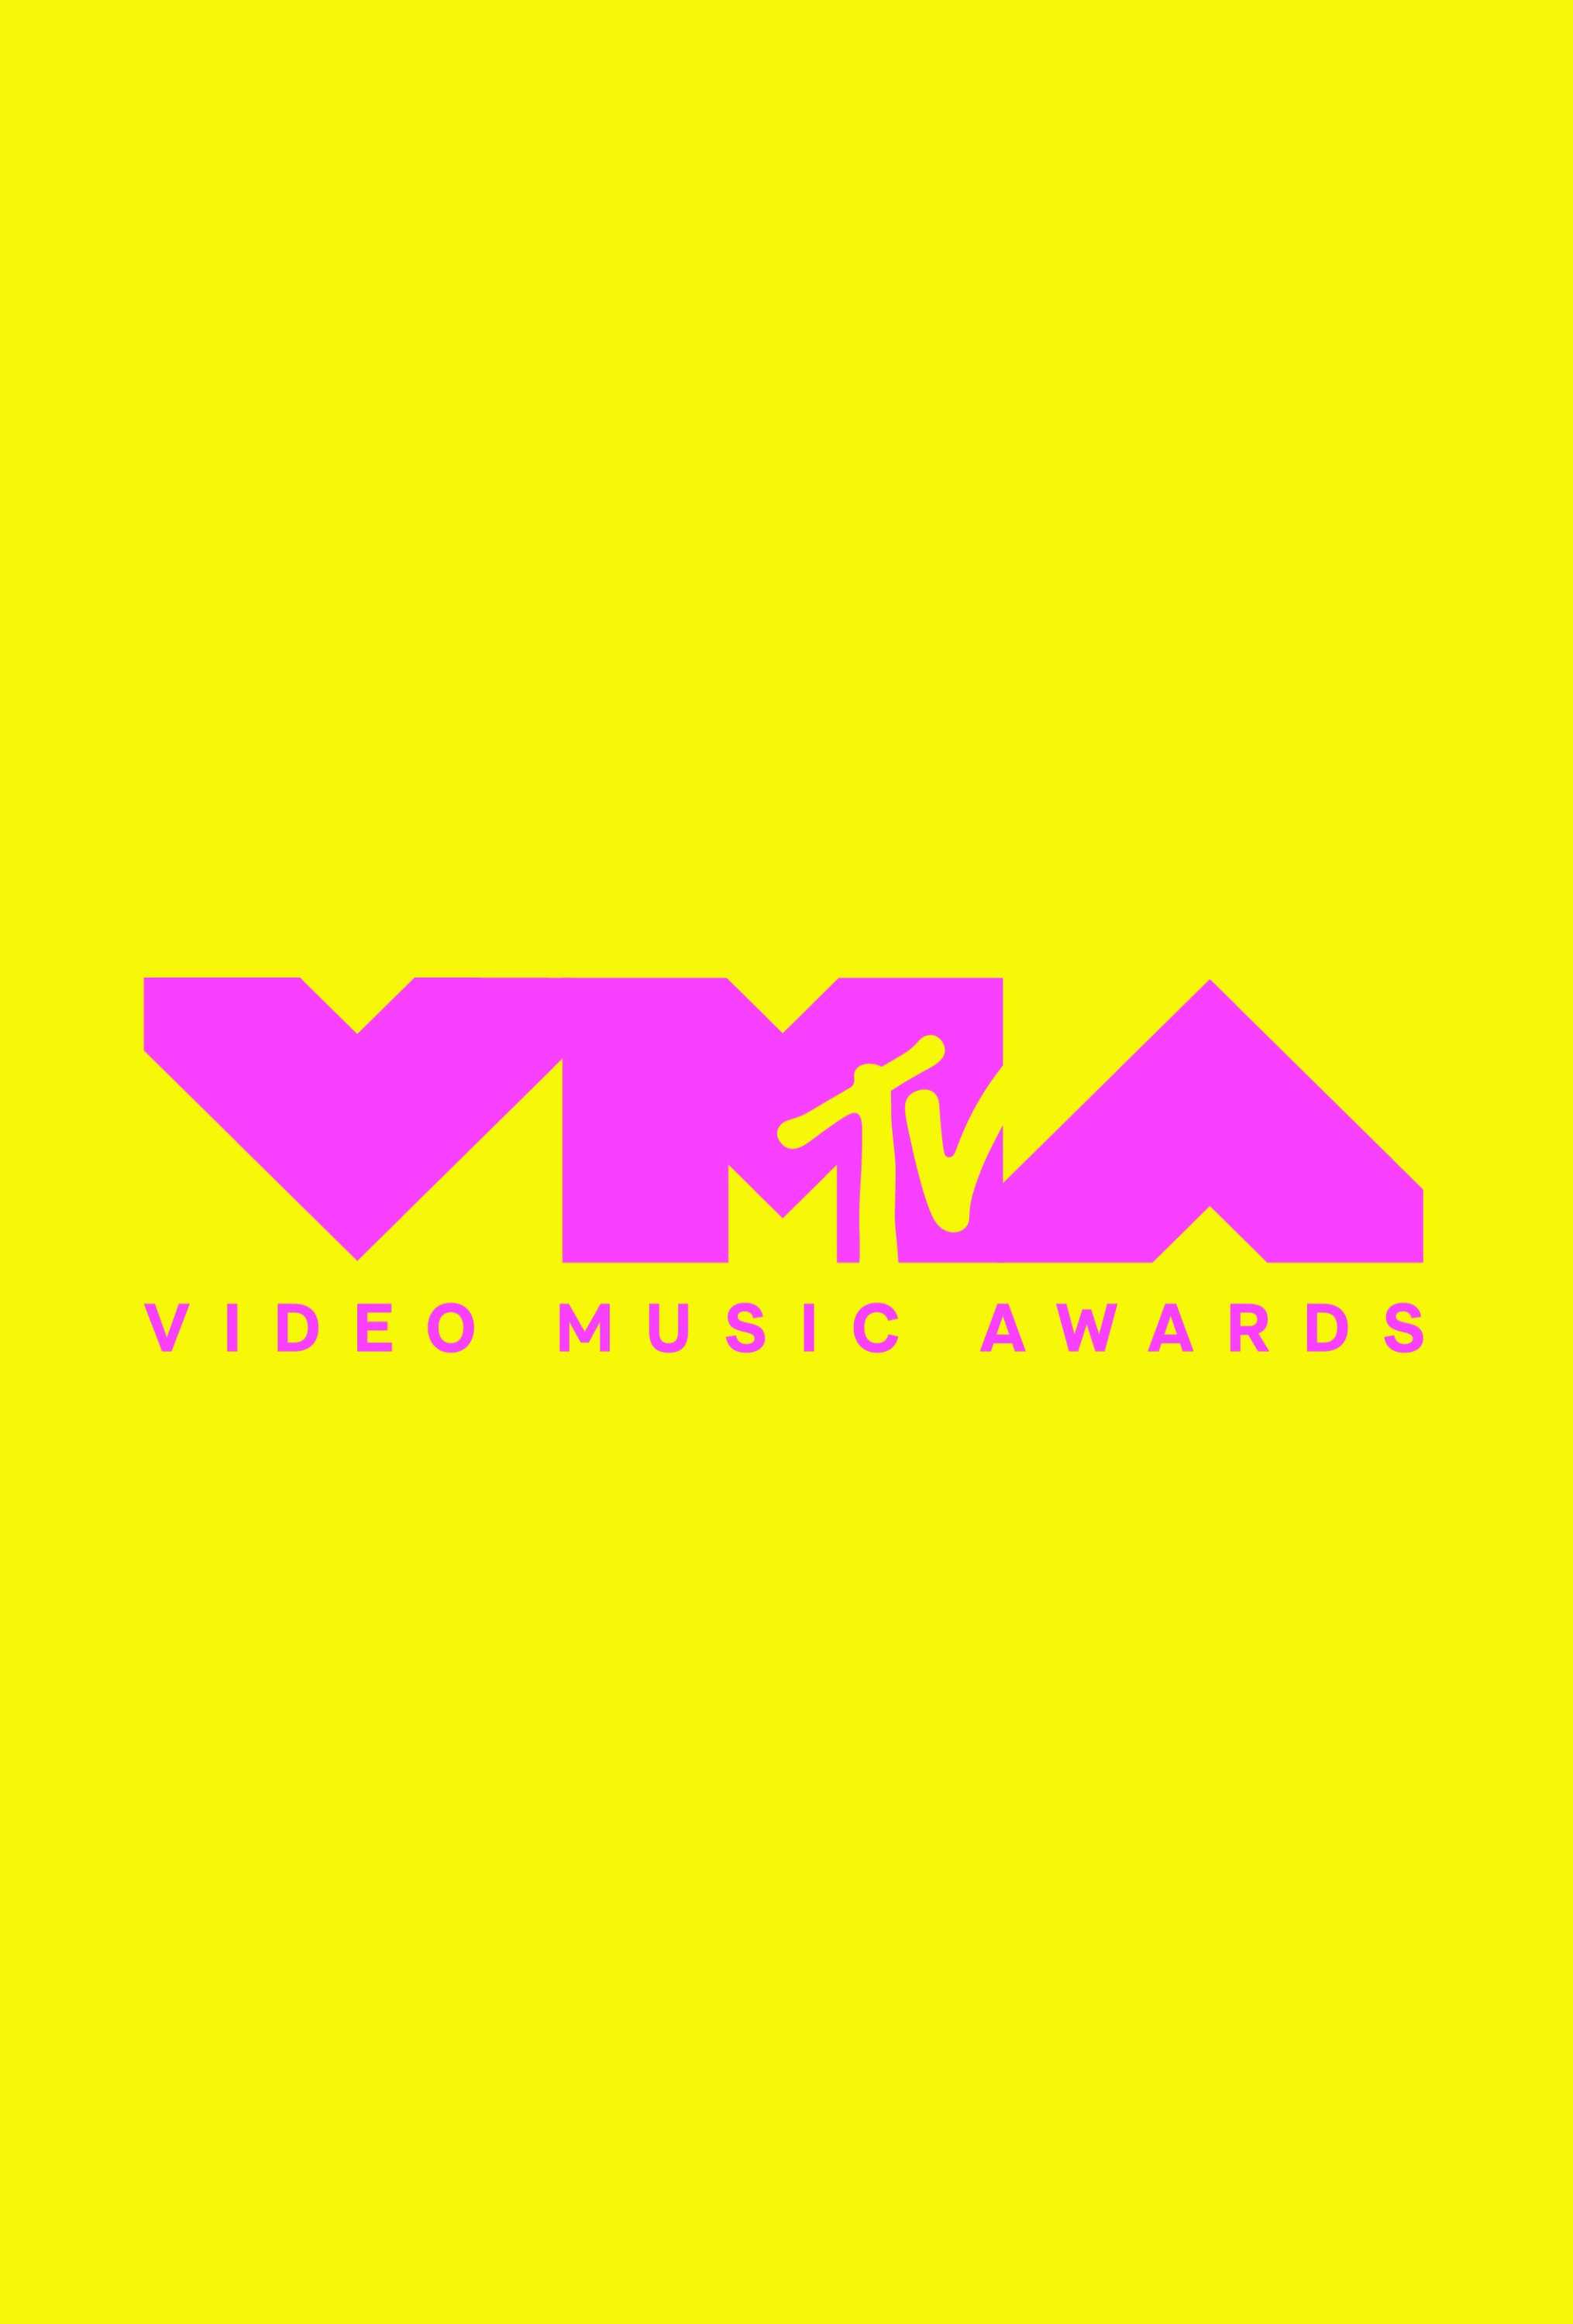 Watch 2022 MTV Video Music Awards in HD () at moviesjoys.cc